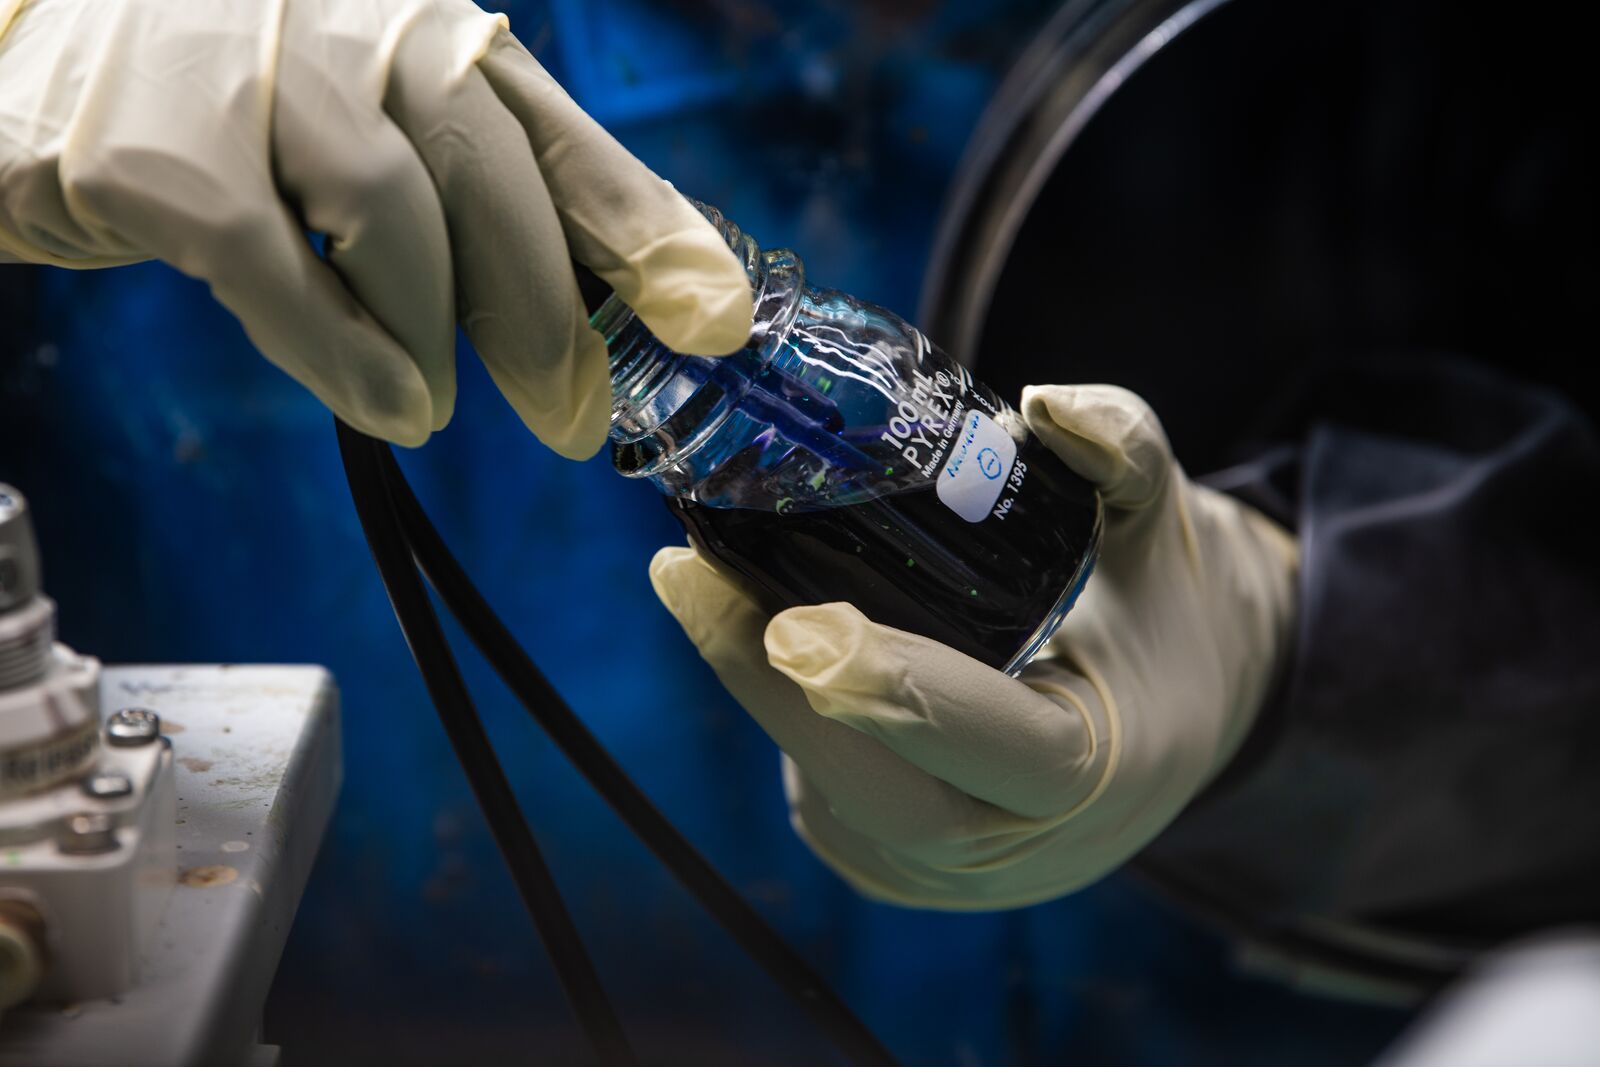 Close-up photo of a researcher sticking a wired prod into a small container of dark liquid